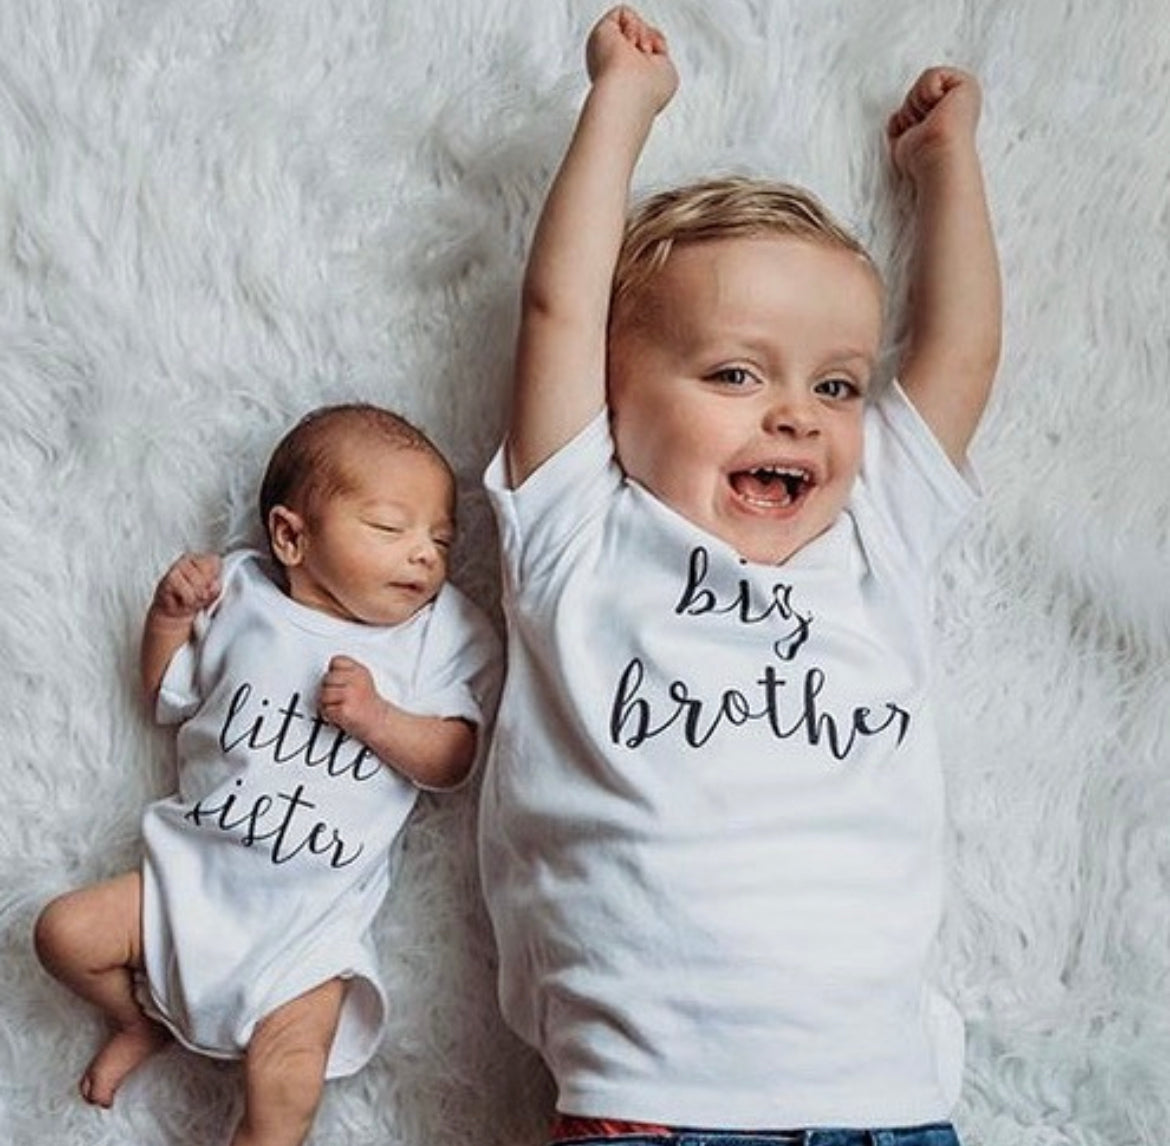 Rose and guy little sister bodysuit, Little sister, big brother, big sister, little sister, gender reveal clothing, new baby clothing, new baby announcement, new baby clothing, rose and guy sibling clothing, sibling tees, rose and guy, new baby arrival, new baby clothing, new baby gift box